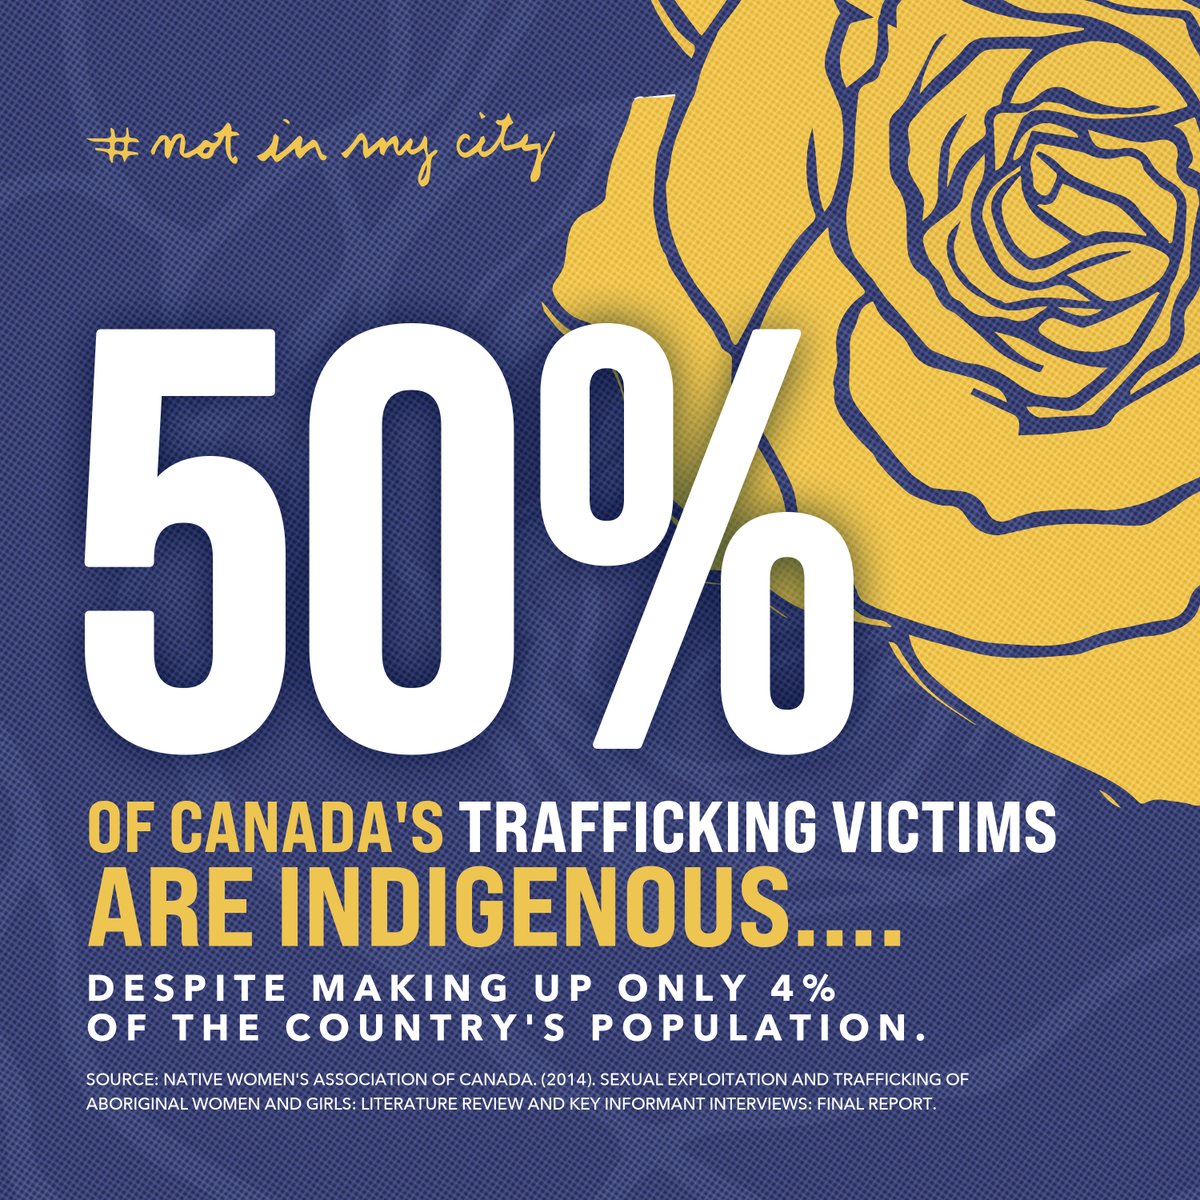 Half of all human trafficking victims in Canada are Indigenous, despite being only 4% of the population. It's an urgent human rights crisis demanding immediate action. Join the solution at notinmycity.ca/learn.